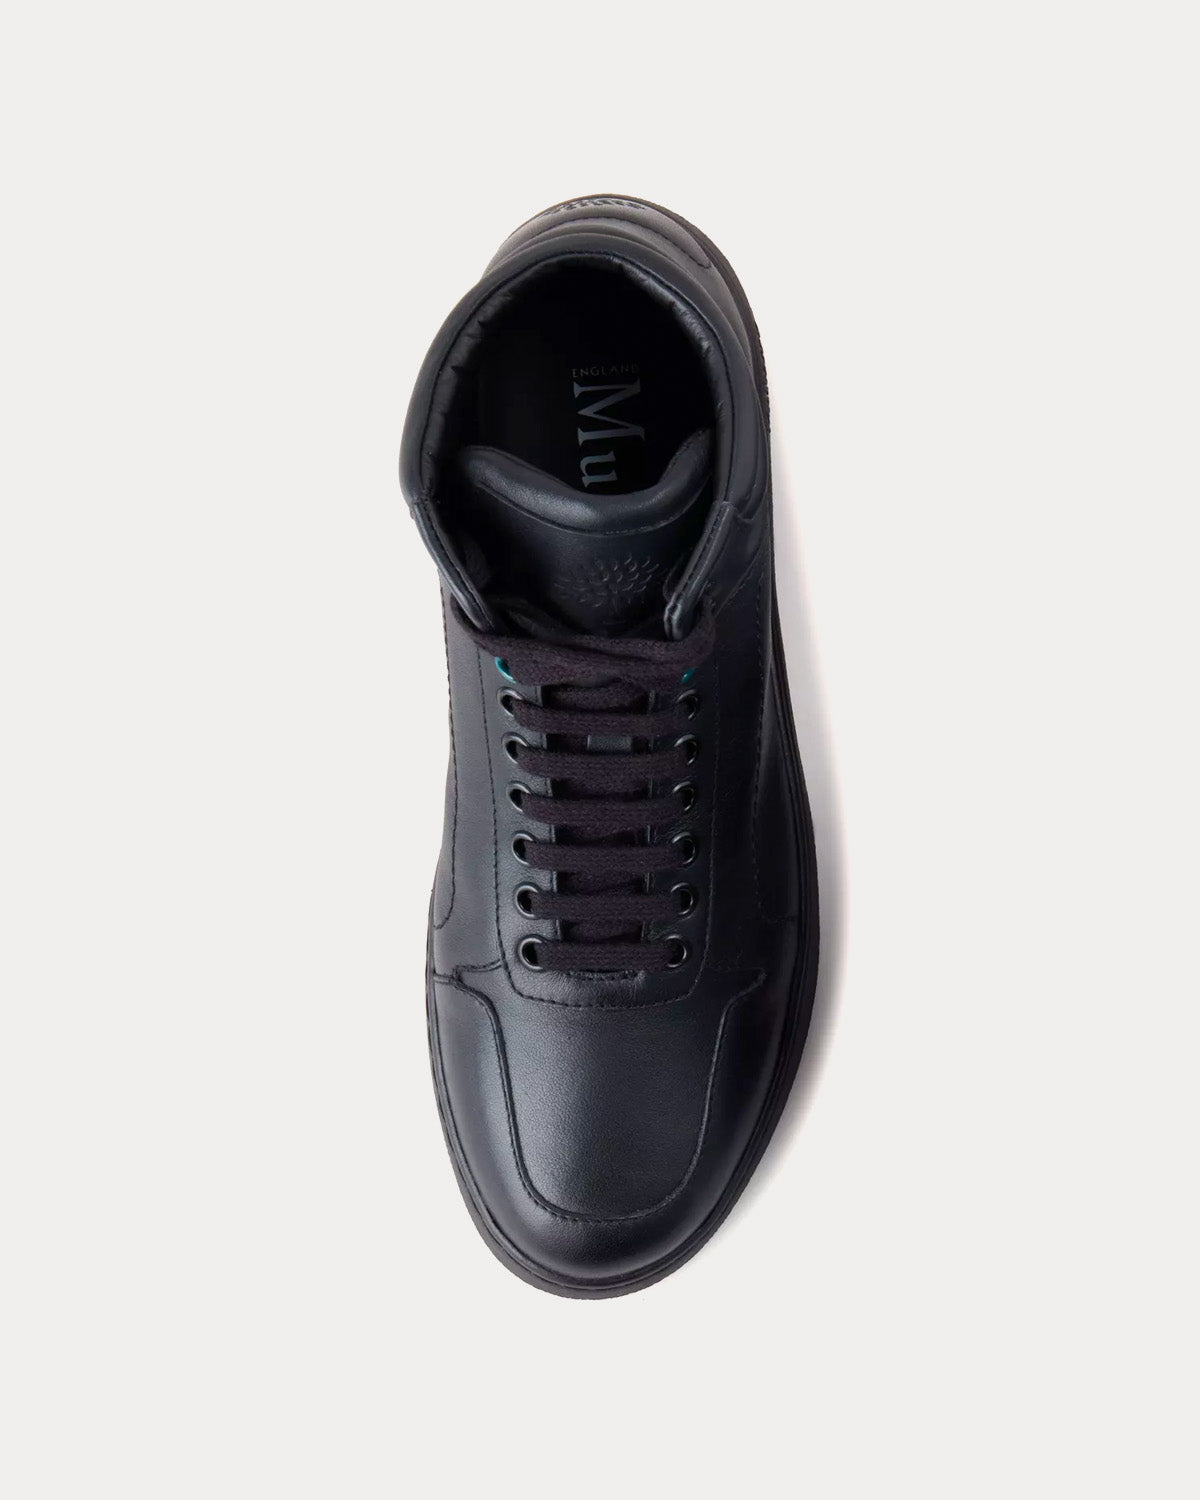 Mulberry - Leather Black High Top Sneakers